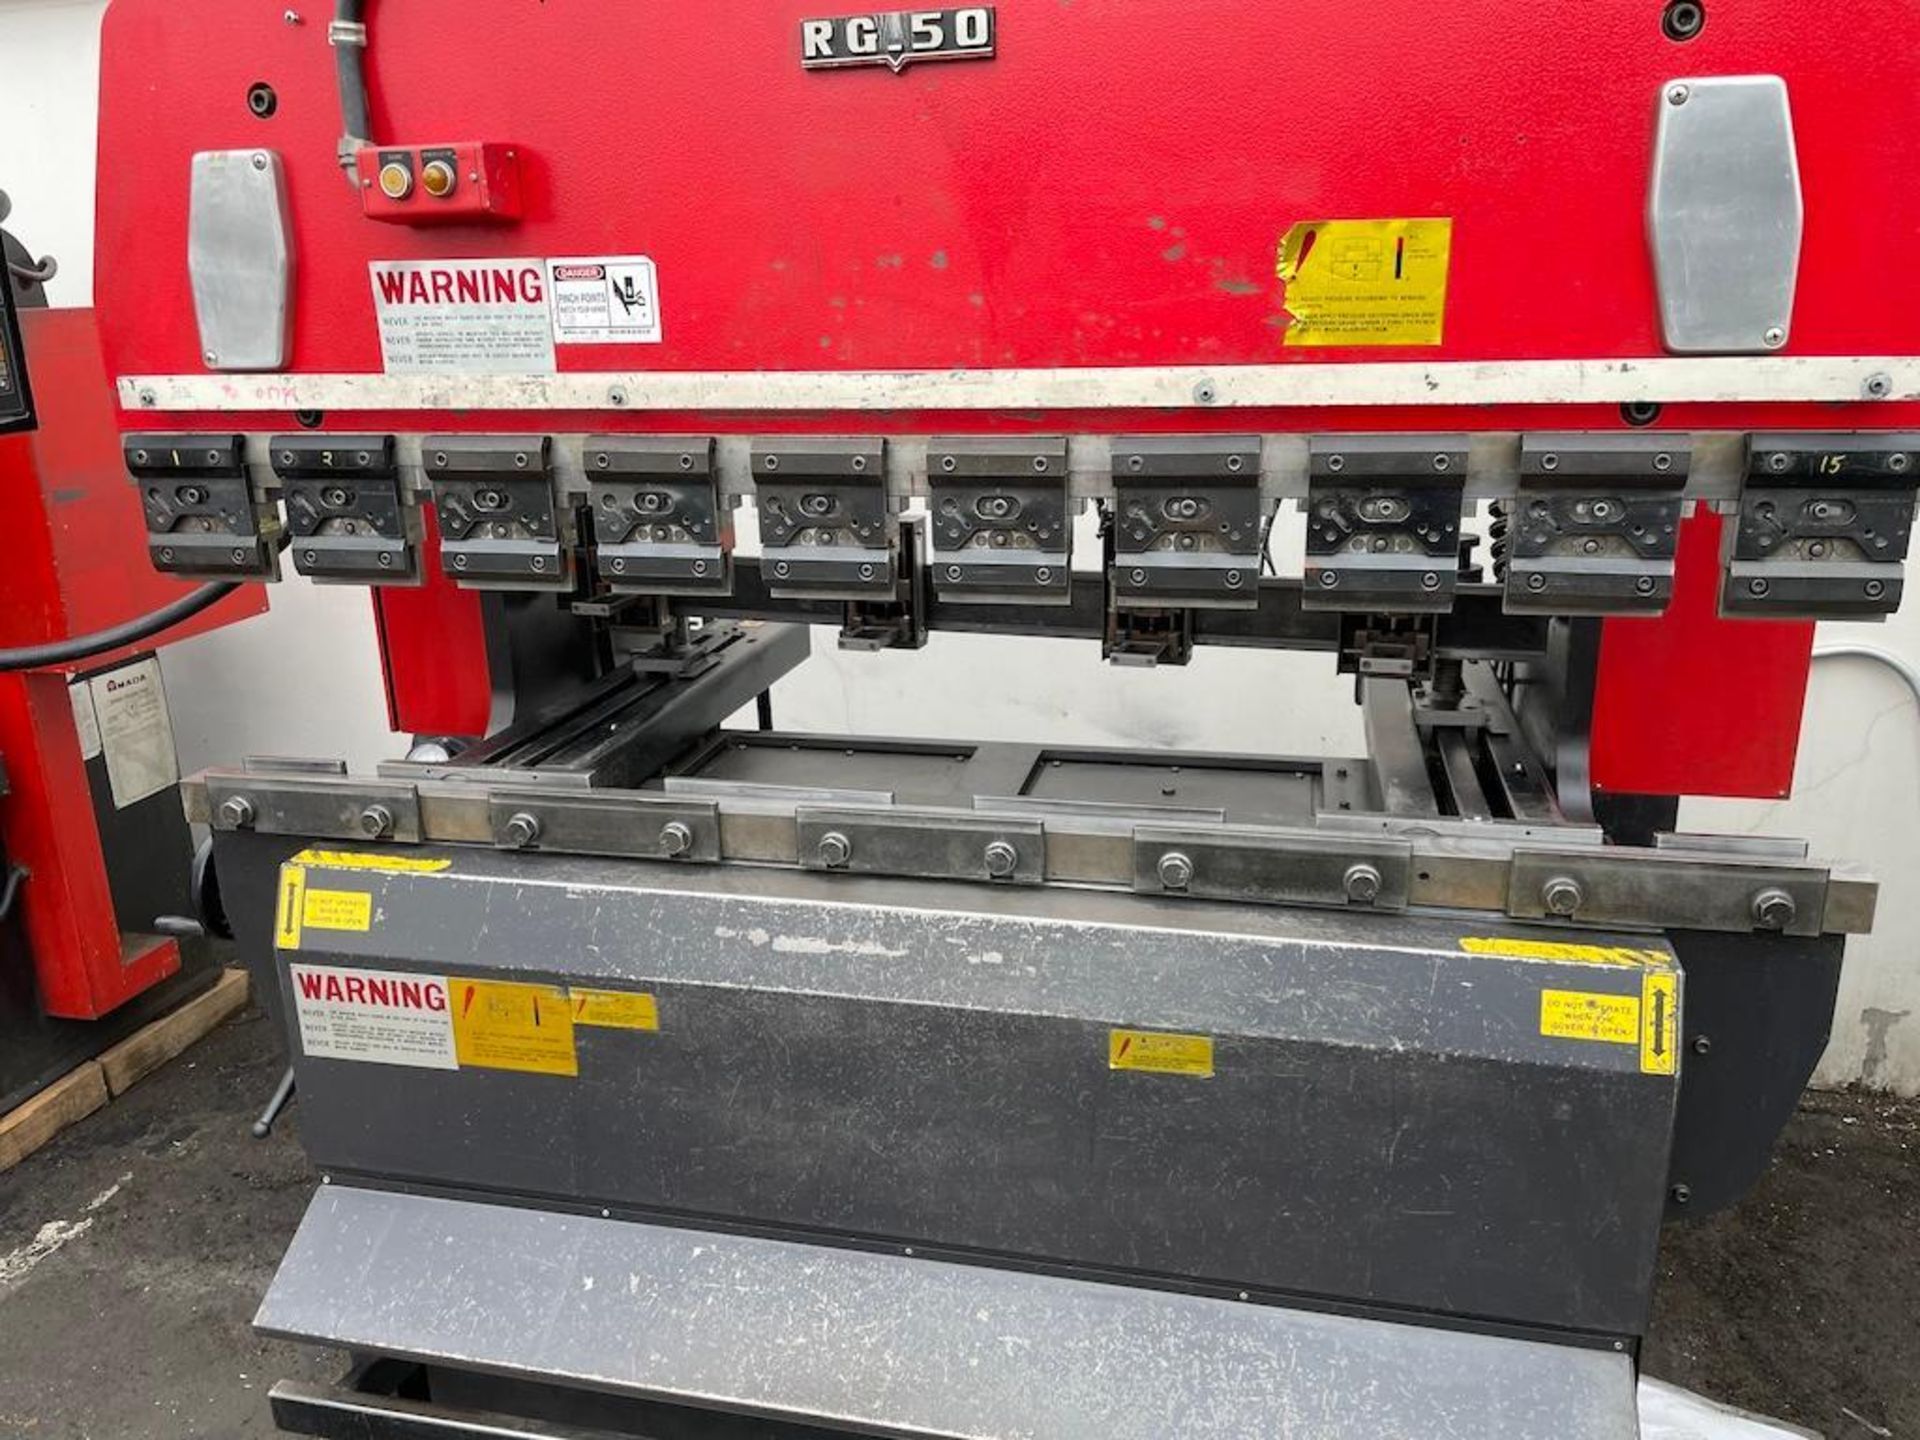 AMADA 50 TON PRESS BRAKE MODEL RG 50, 78.8 IN BED, 15.76 THROAT, NC9-EXII CONTROLS, 2 AXIS BACK - Image 3 of 6